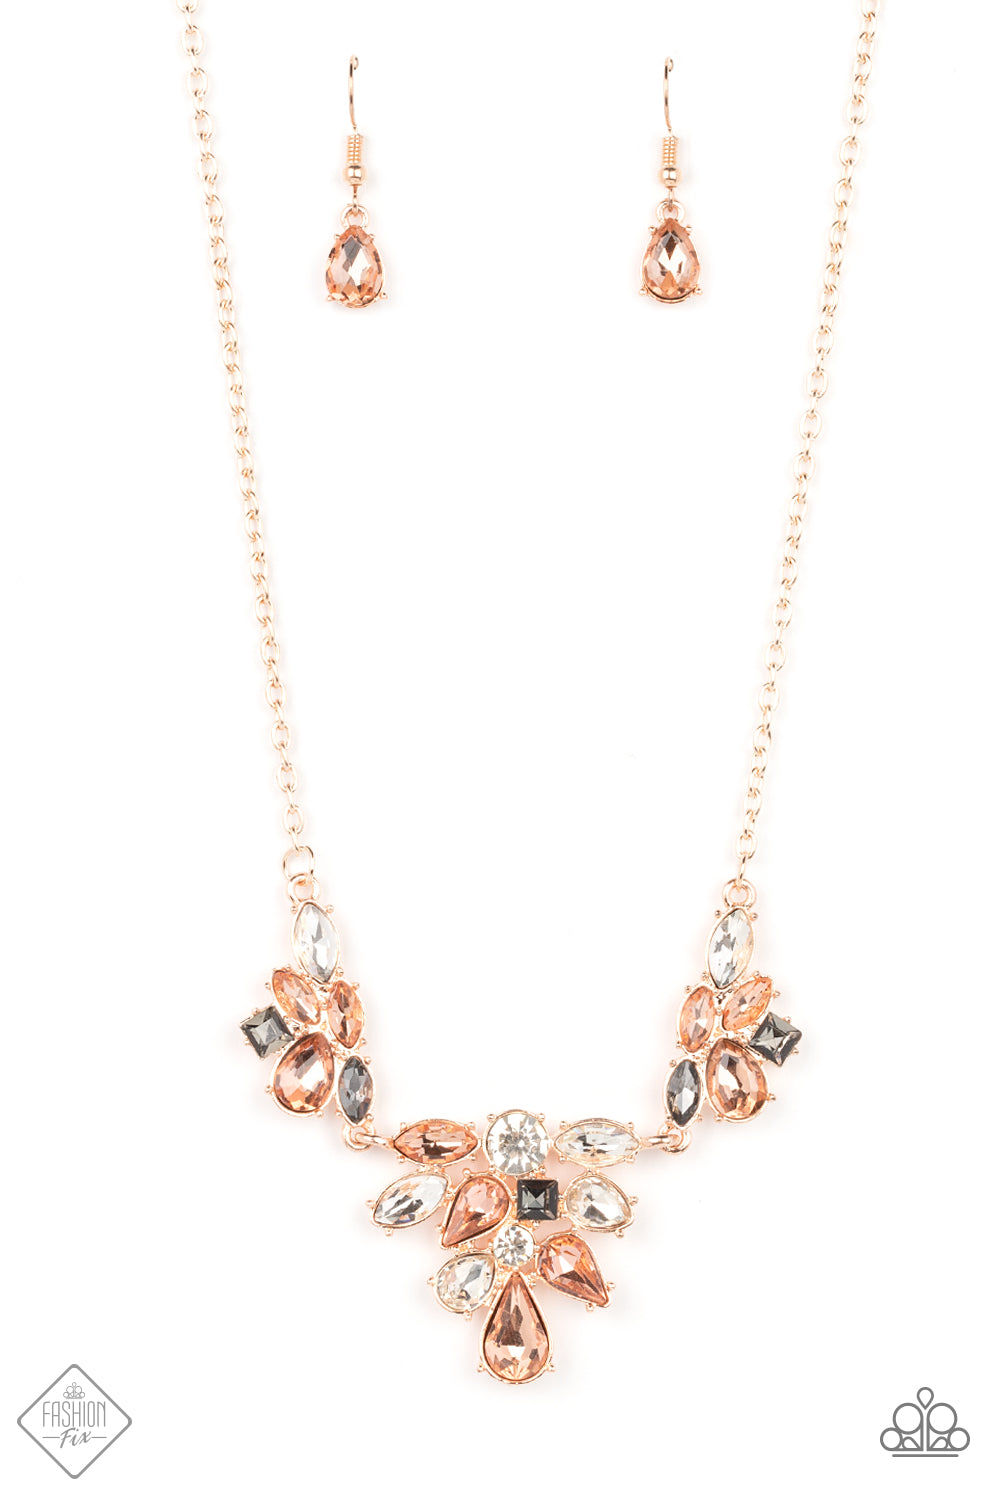 Completely Captivated - rose gold - Paparazzi necklace